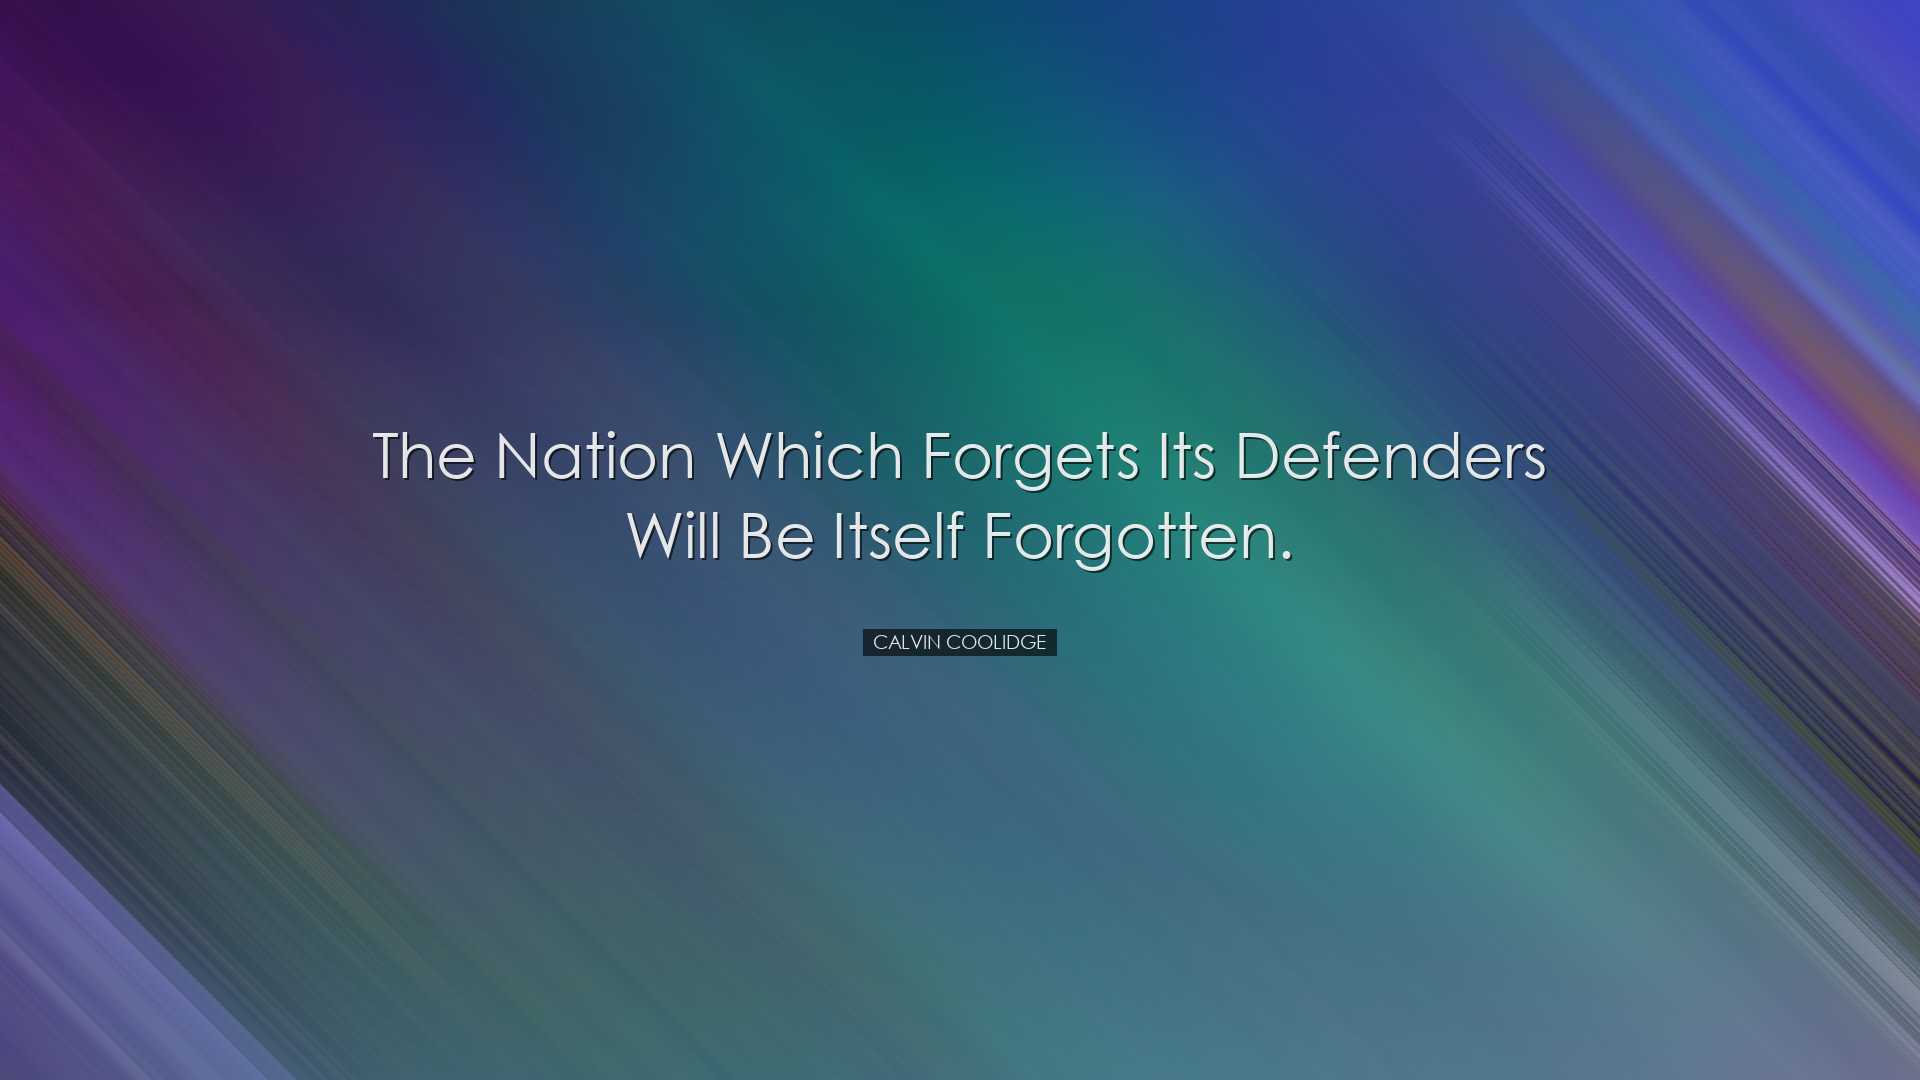 The nation which forgets its defenders will be itself forgotten. -